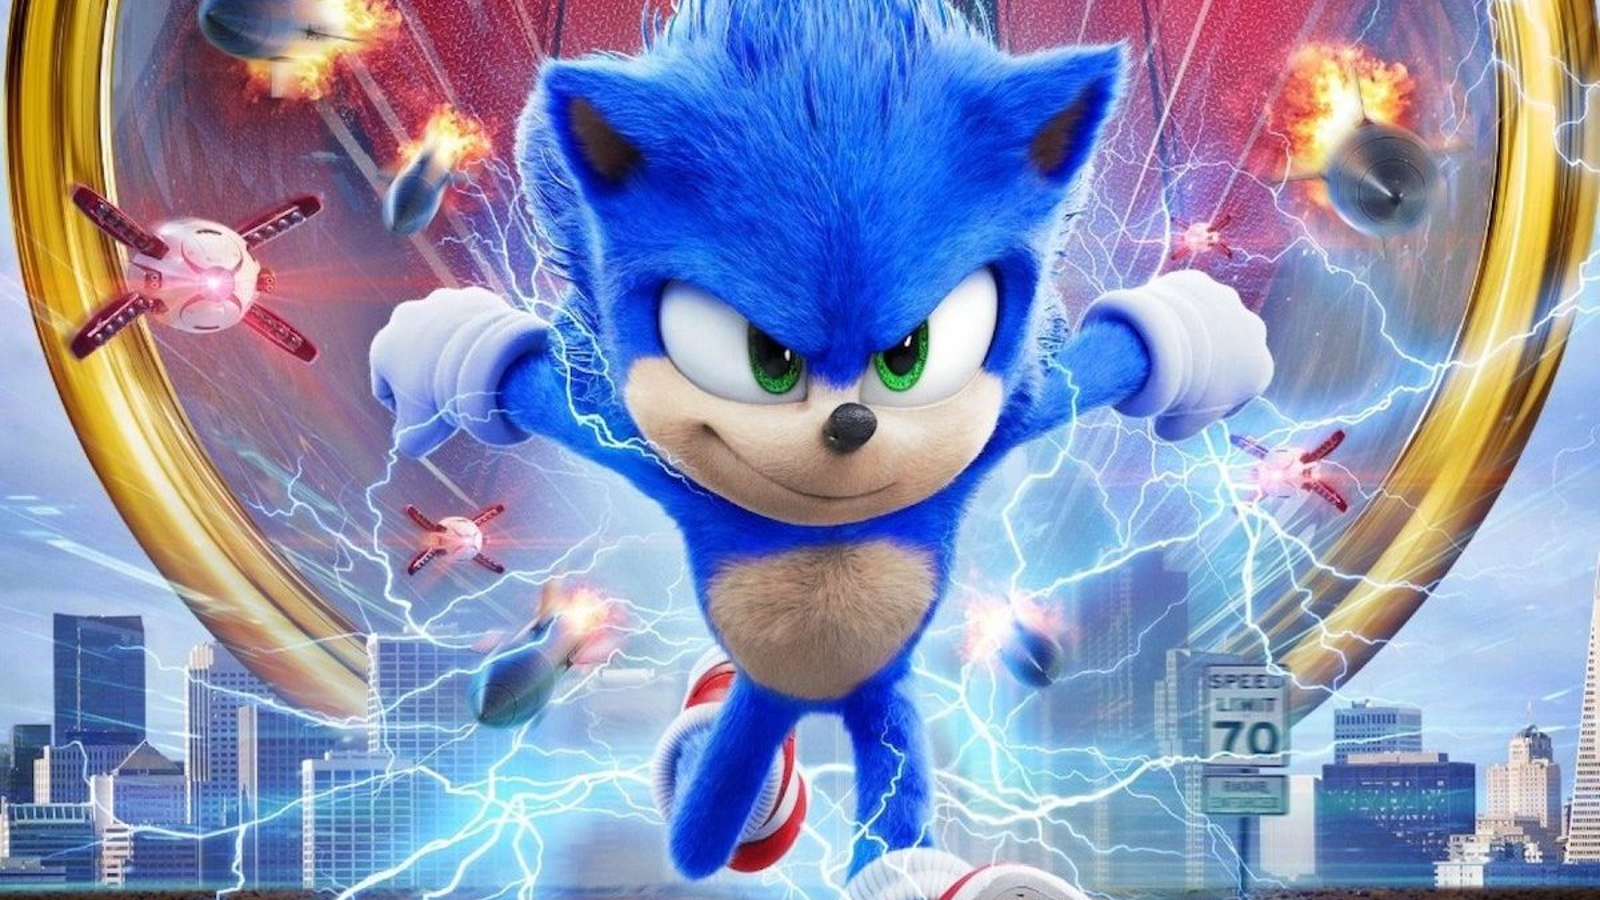 Sonic The Hedgehog 2 becomes top-grossing video game movie of all time